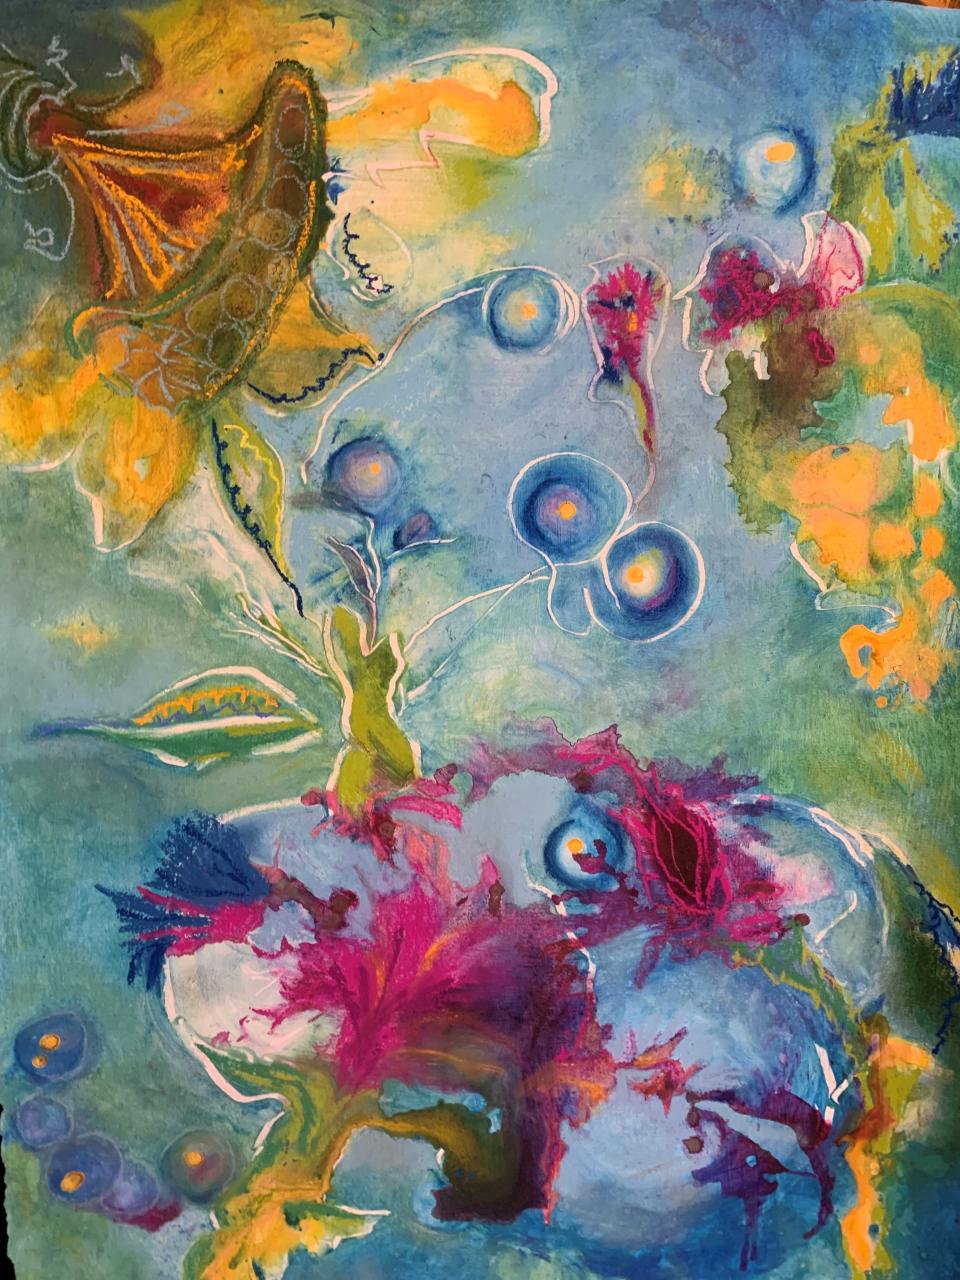 Patina Arts Centre in downtown Canton will present "Bloom" from 5 to 9 p.m. on Friday. The exhibition features more than 30 artists, including this  work by Eleanor Kuder.